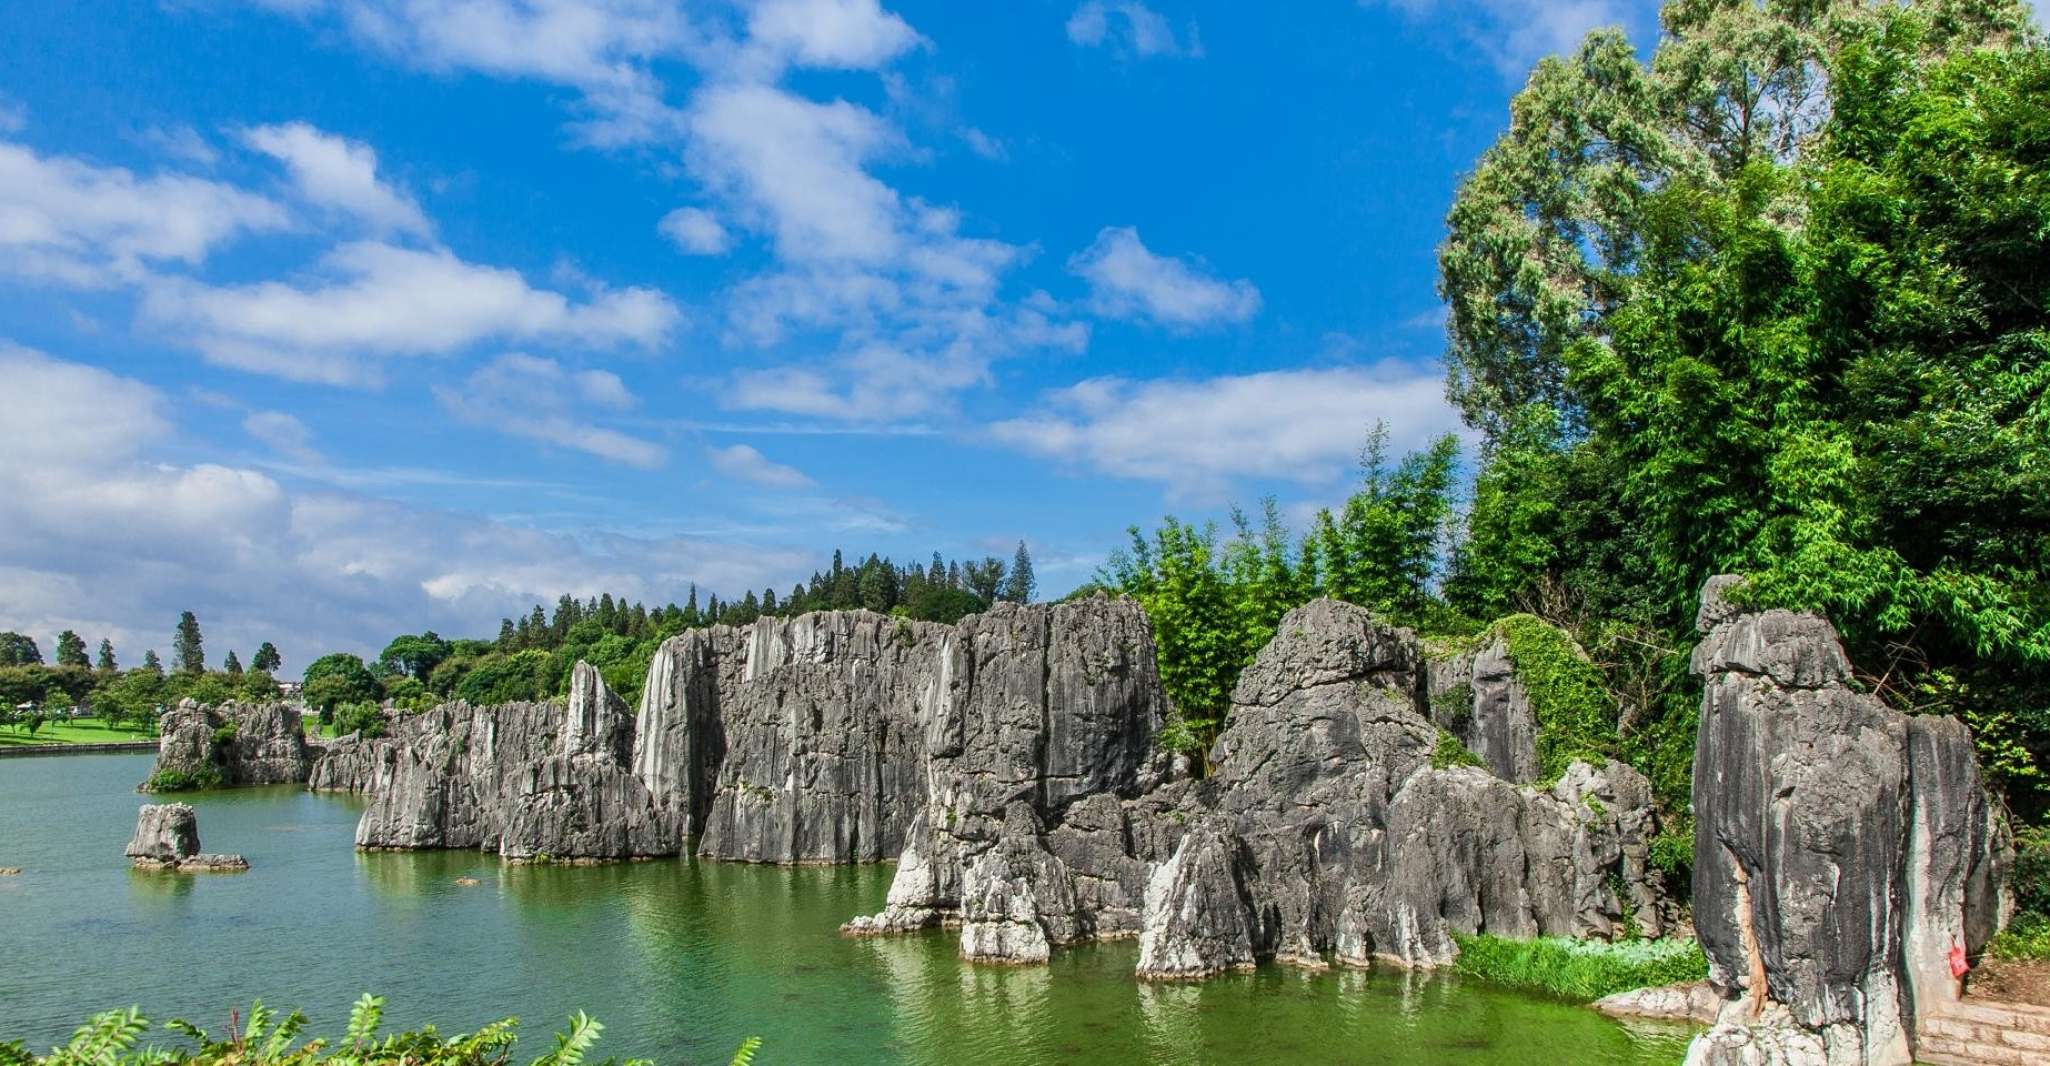 Private tour to Kunming Stone forest - Housity